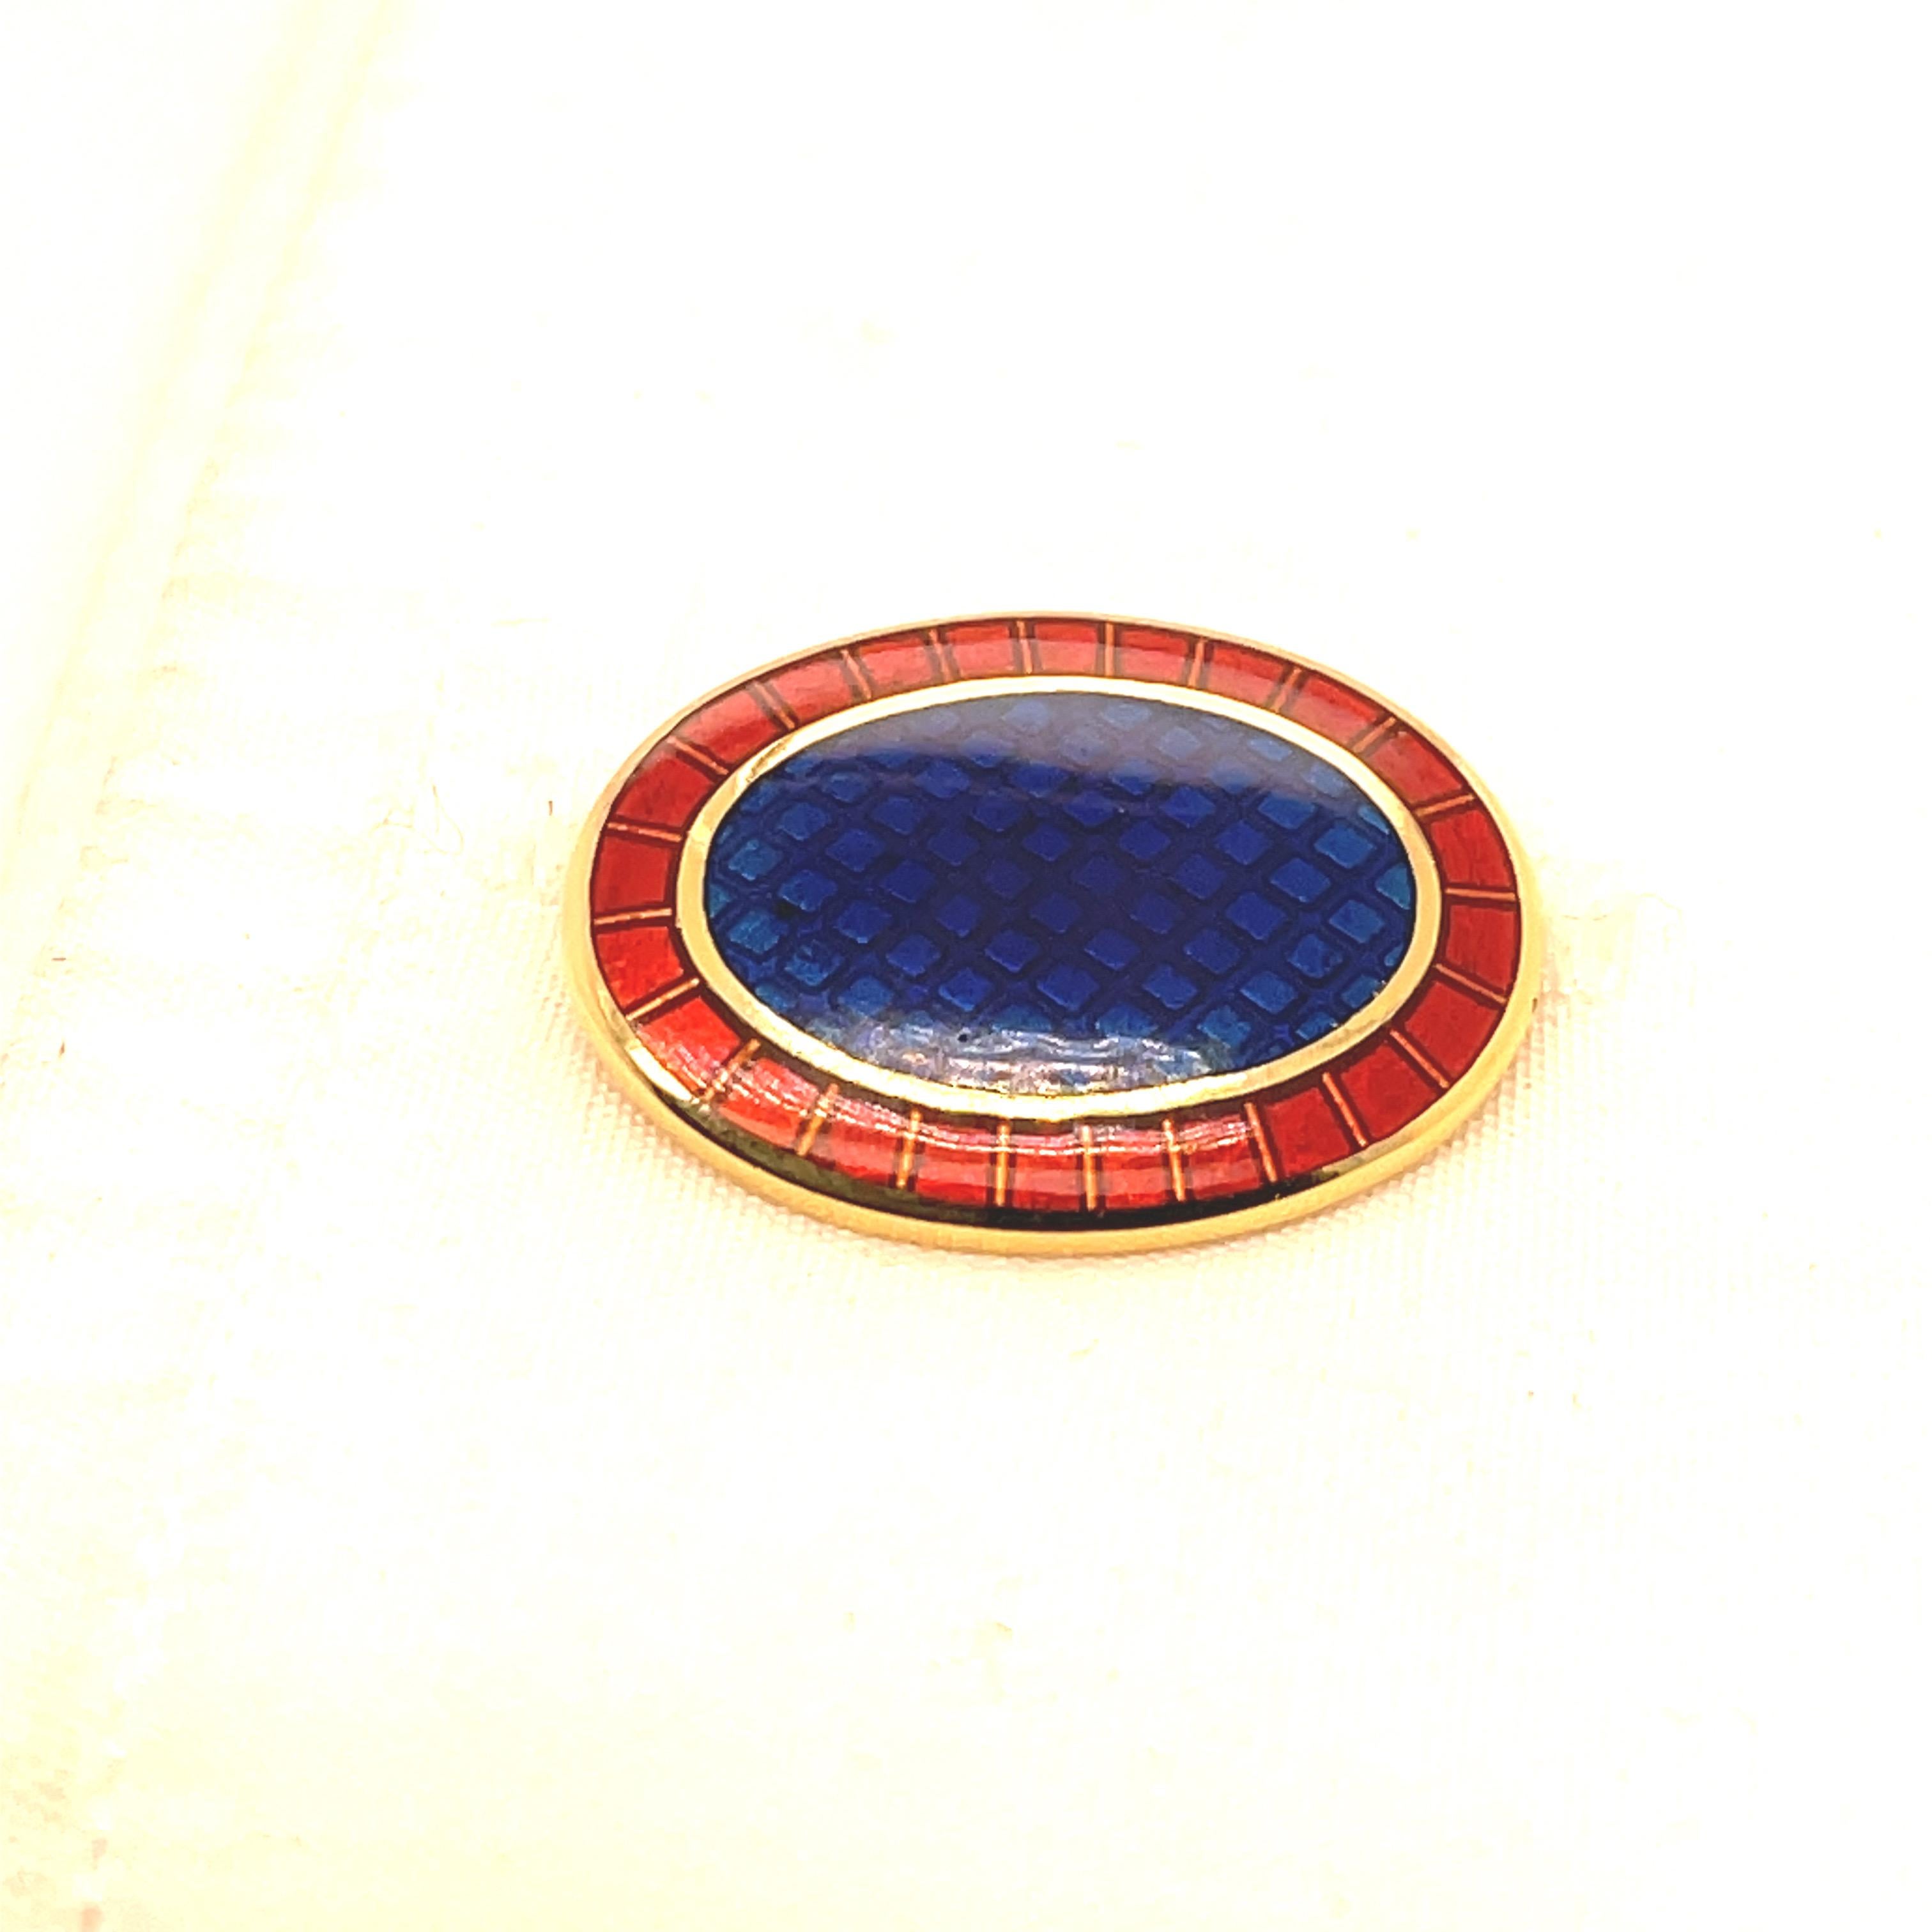 Large striking double-sided cufflinks.  Made and signed by TIFFANY & CO.  Solid gauge 18K yellow gold.  The centers are cobalt blue guilloche enamel; the outer borders are a geometric red guilloche enamel pattern.  Double-sided with chain link